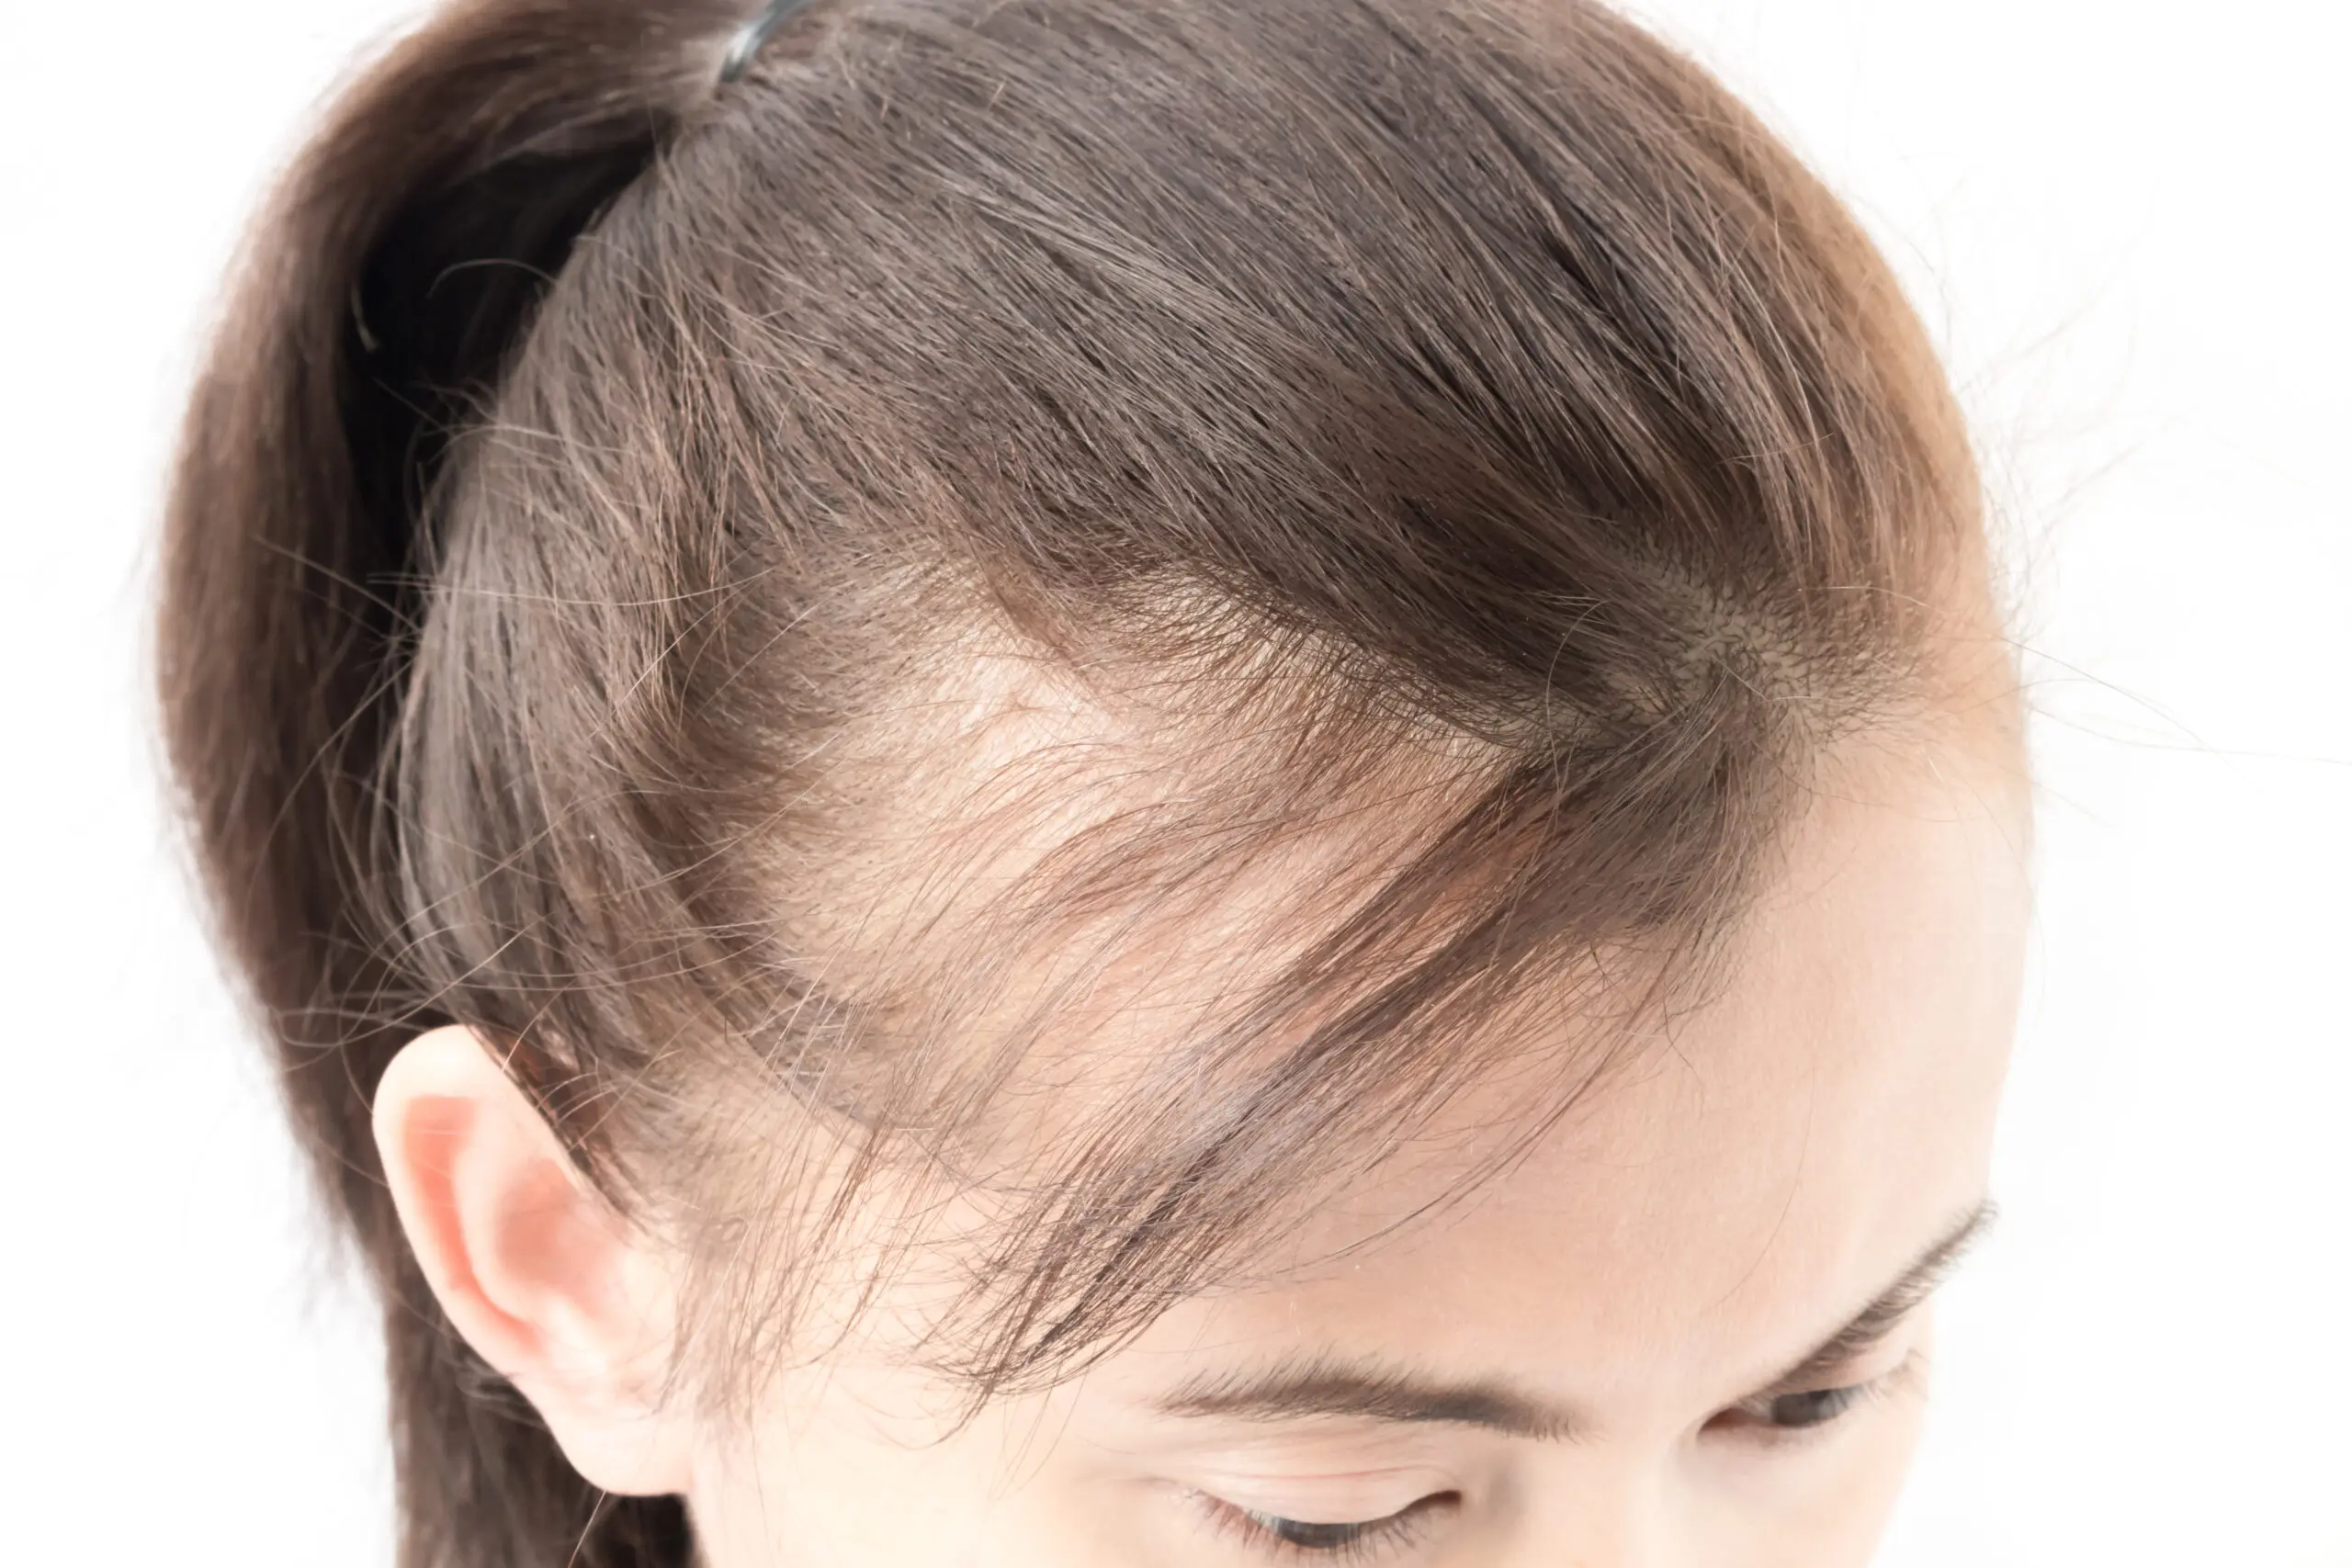 Hair Loss in Women: Causes and Treatment - EVEXIAS Health Solutions